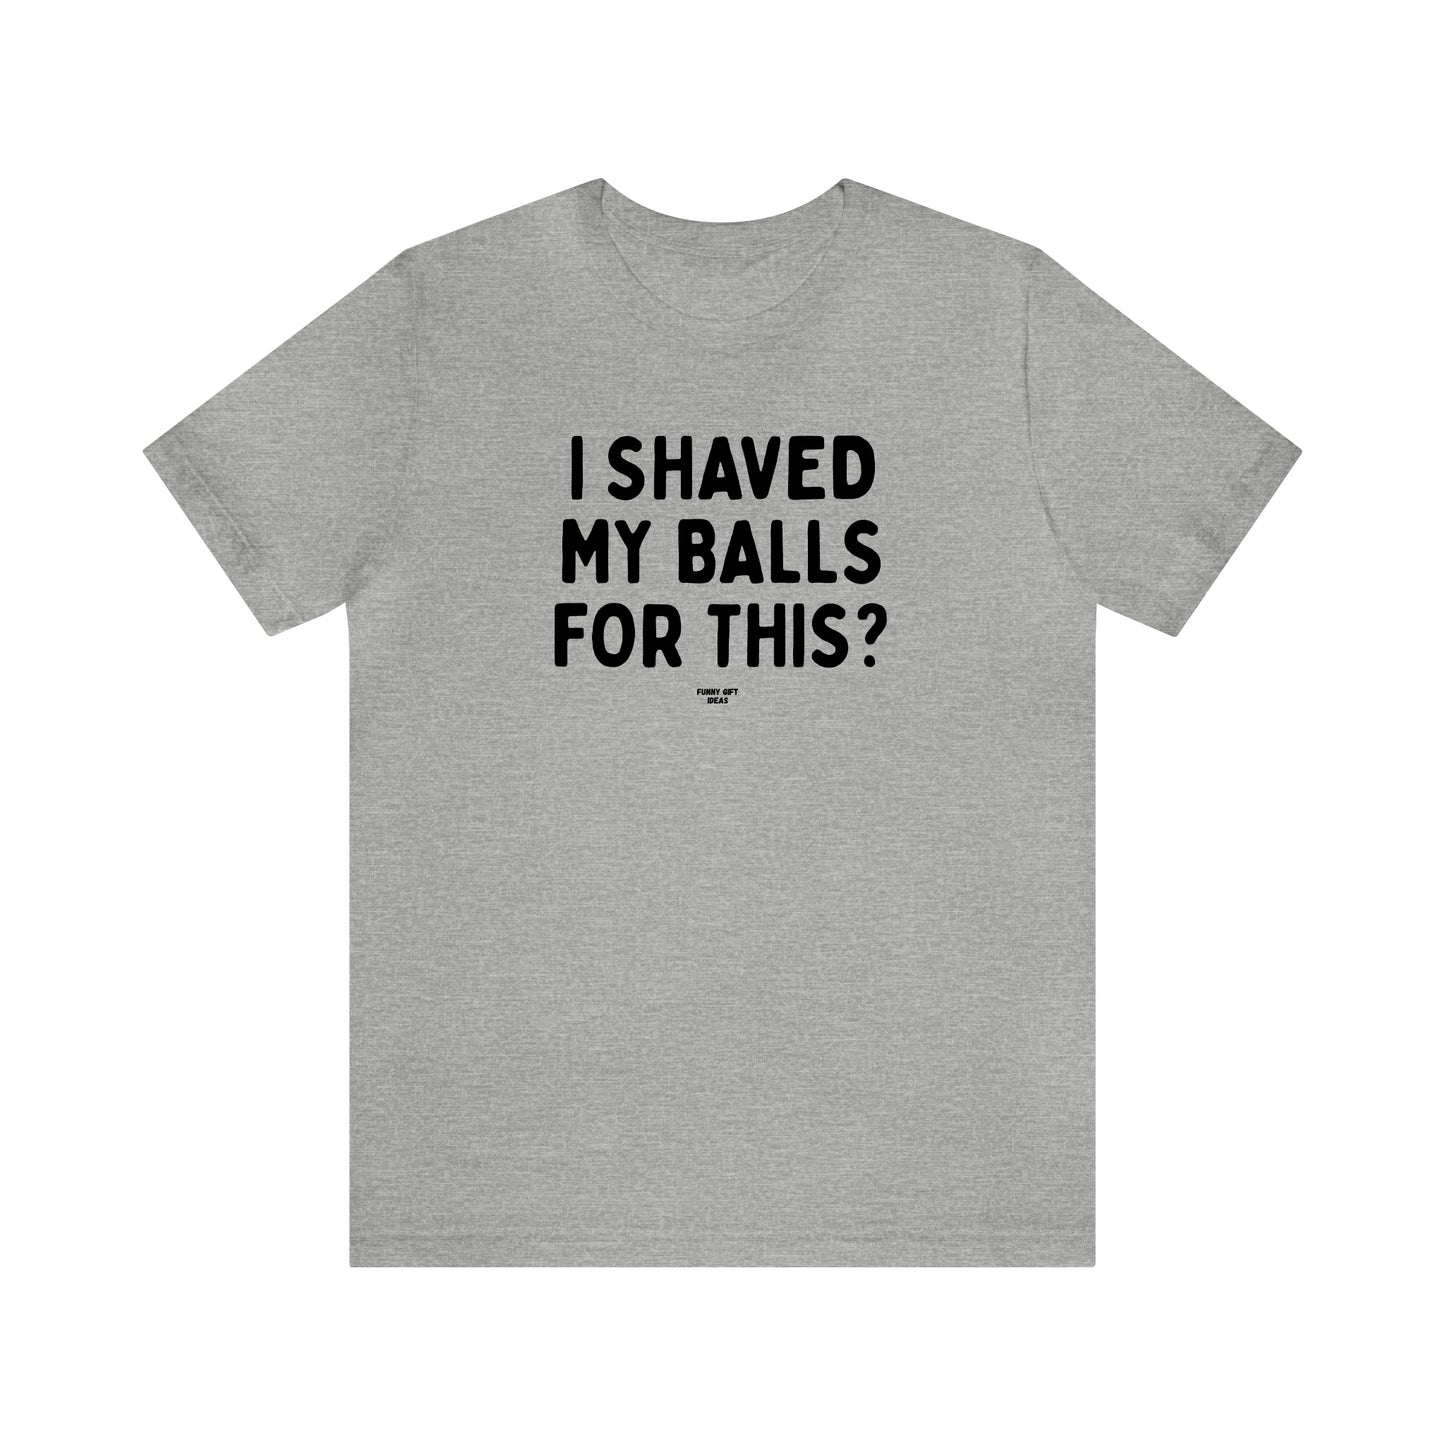 Mens T Shirts - I Shaved My Balls for This? - Funny Men T Shirts